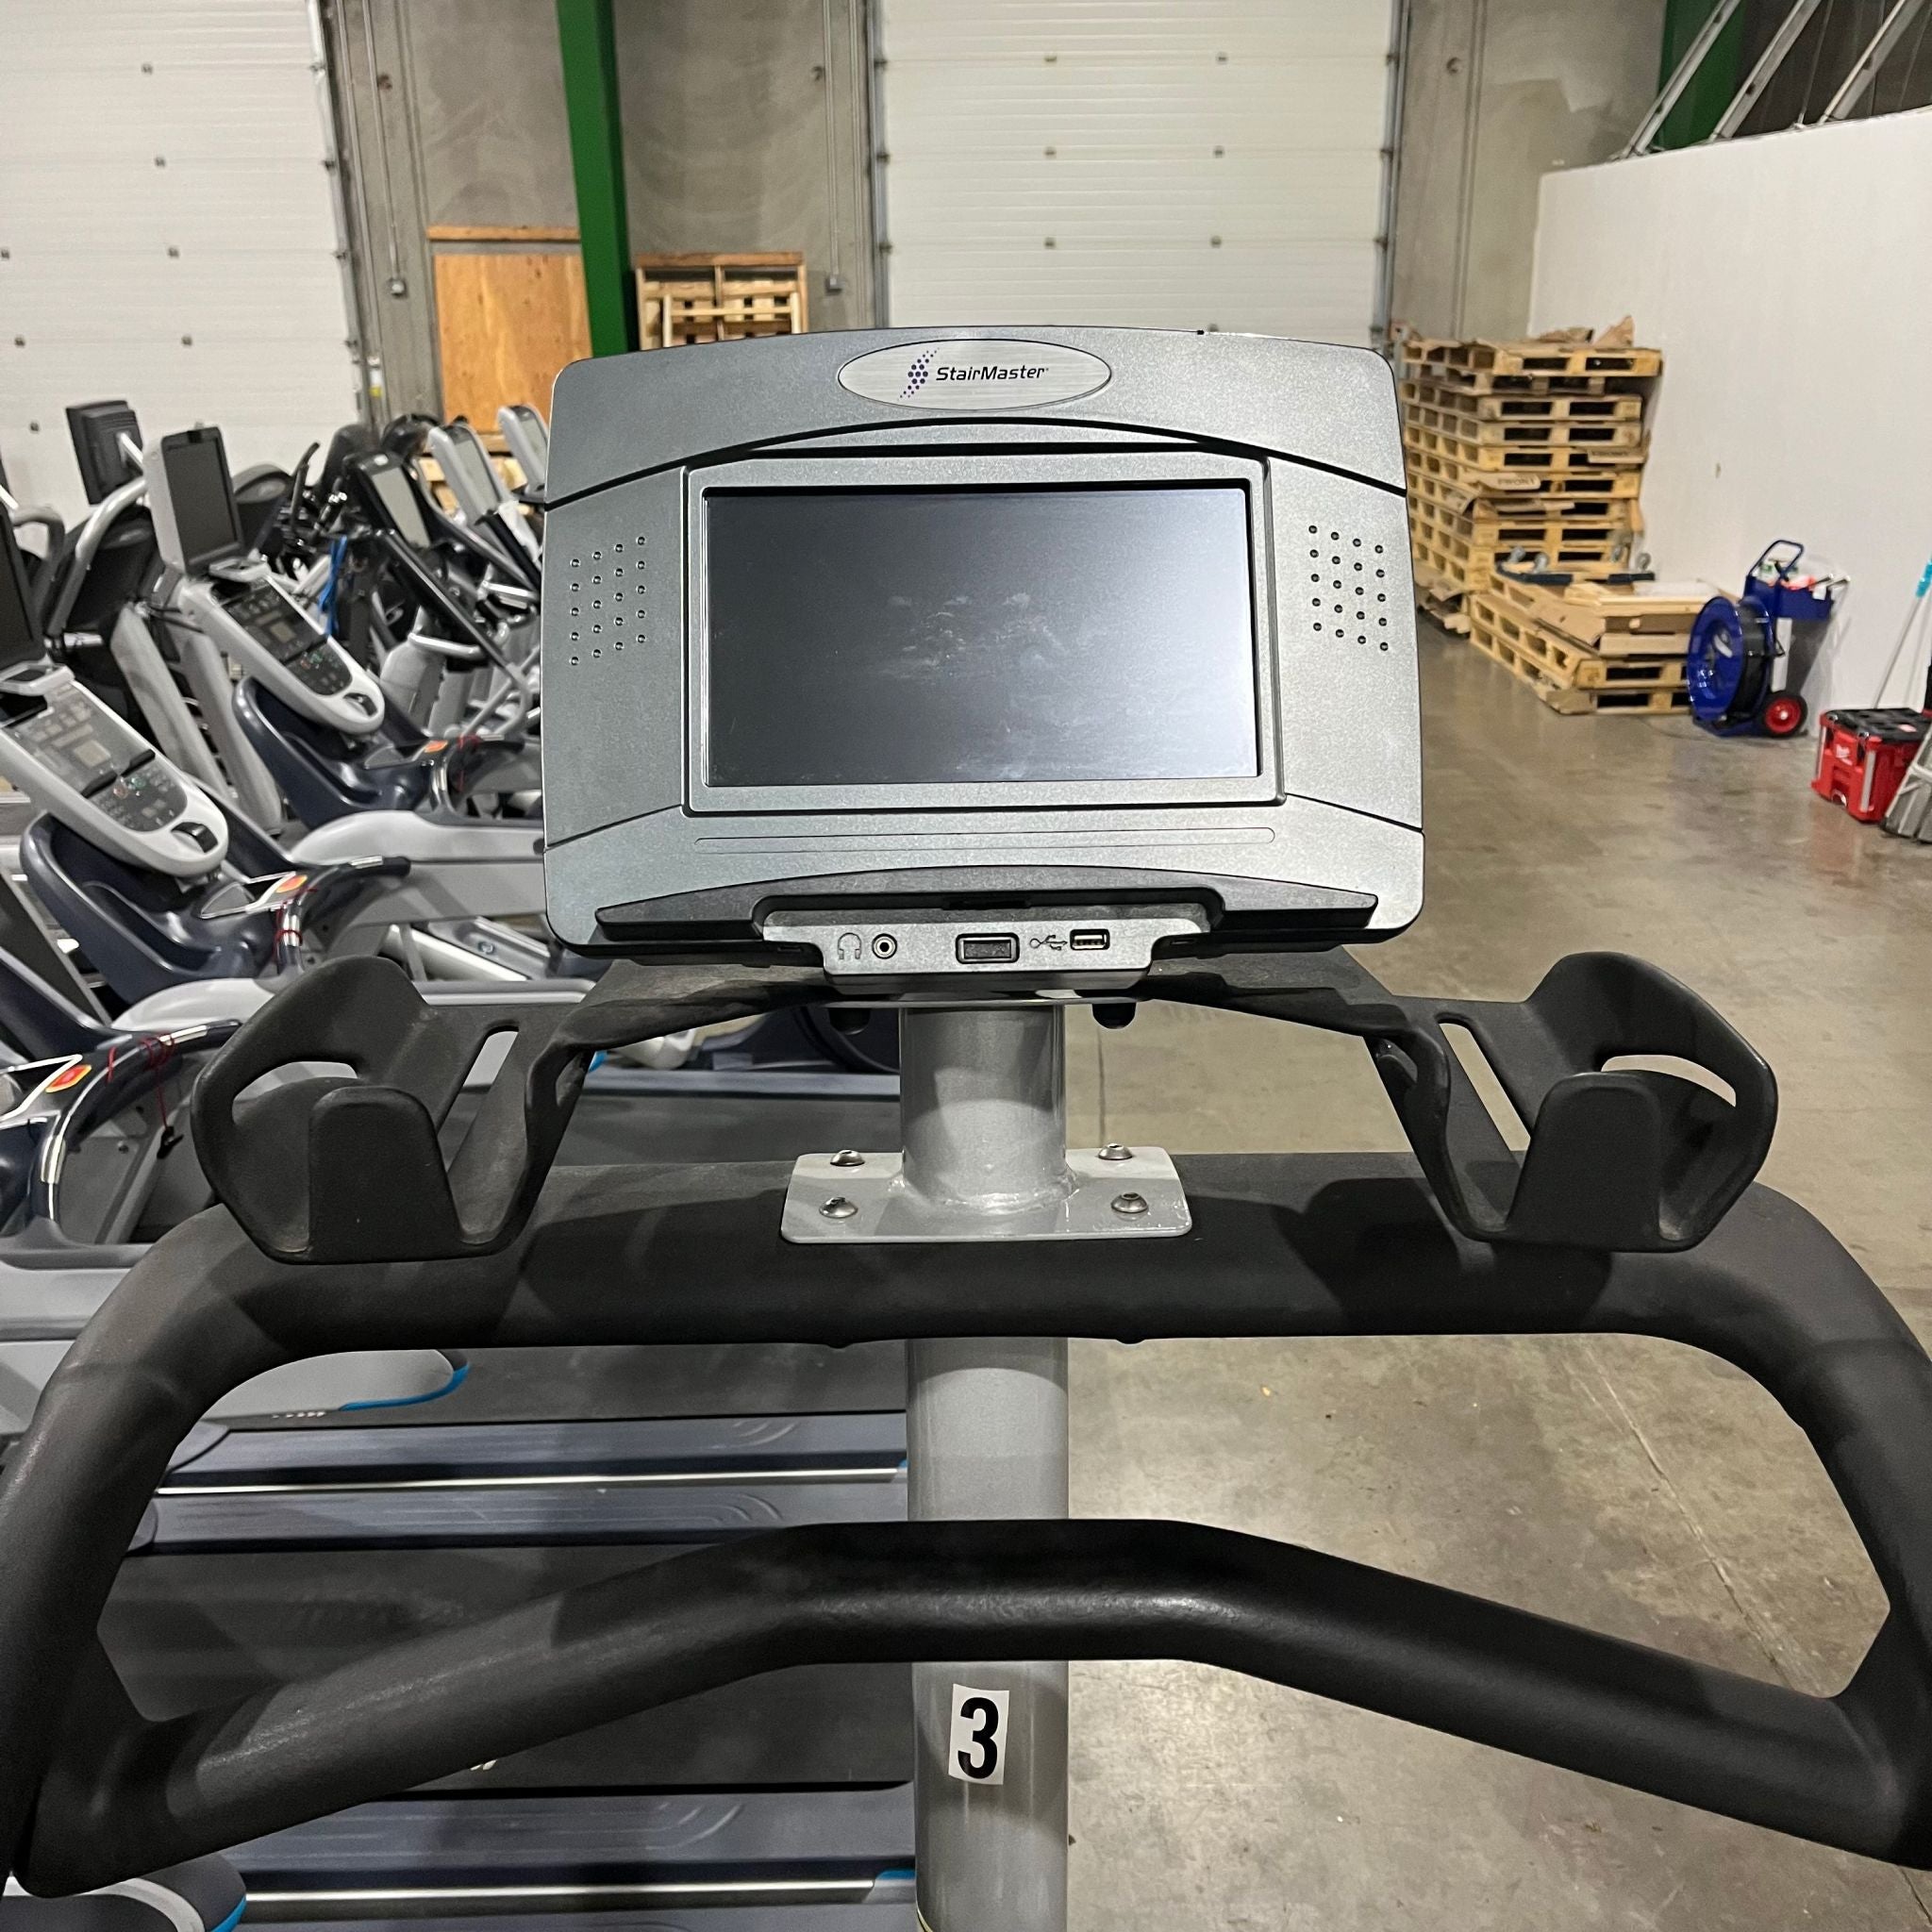 The touchscreen console on the StairMaster SM5 StepMill in Warehouse